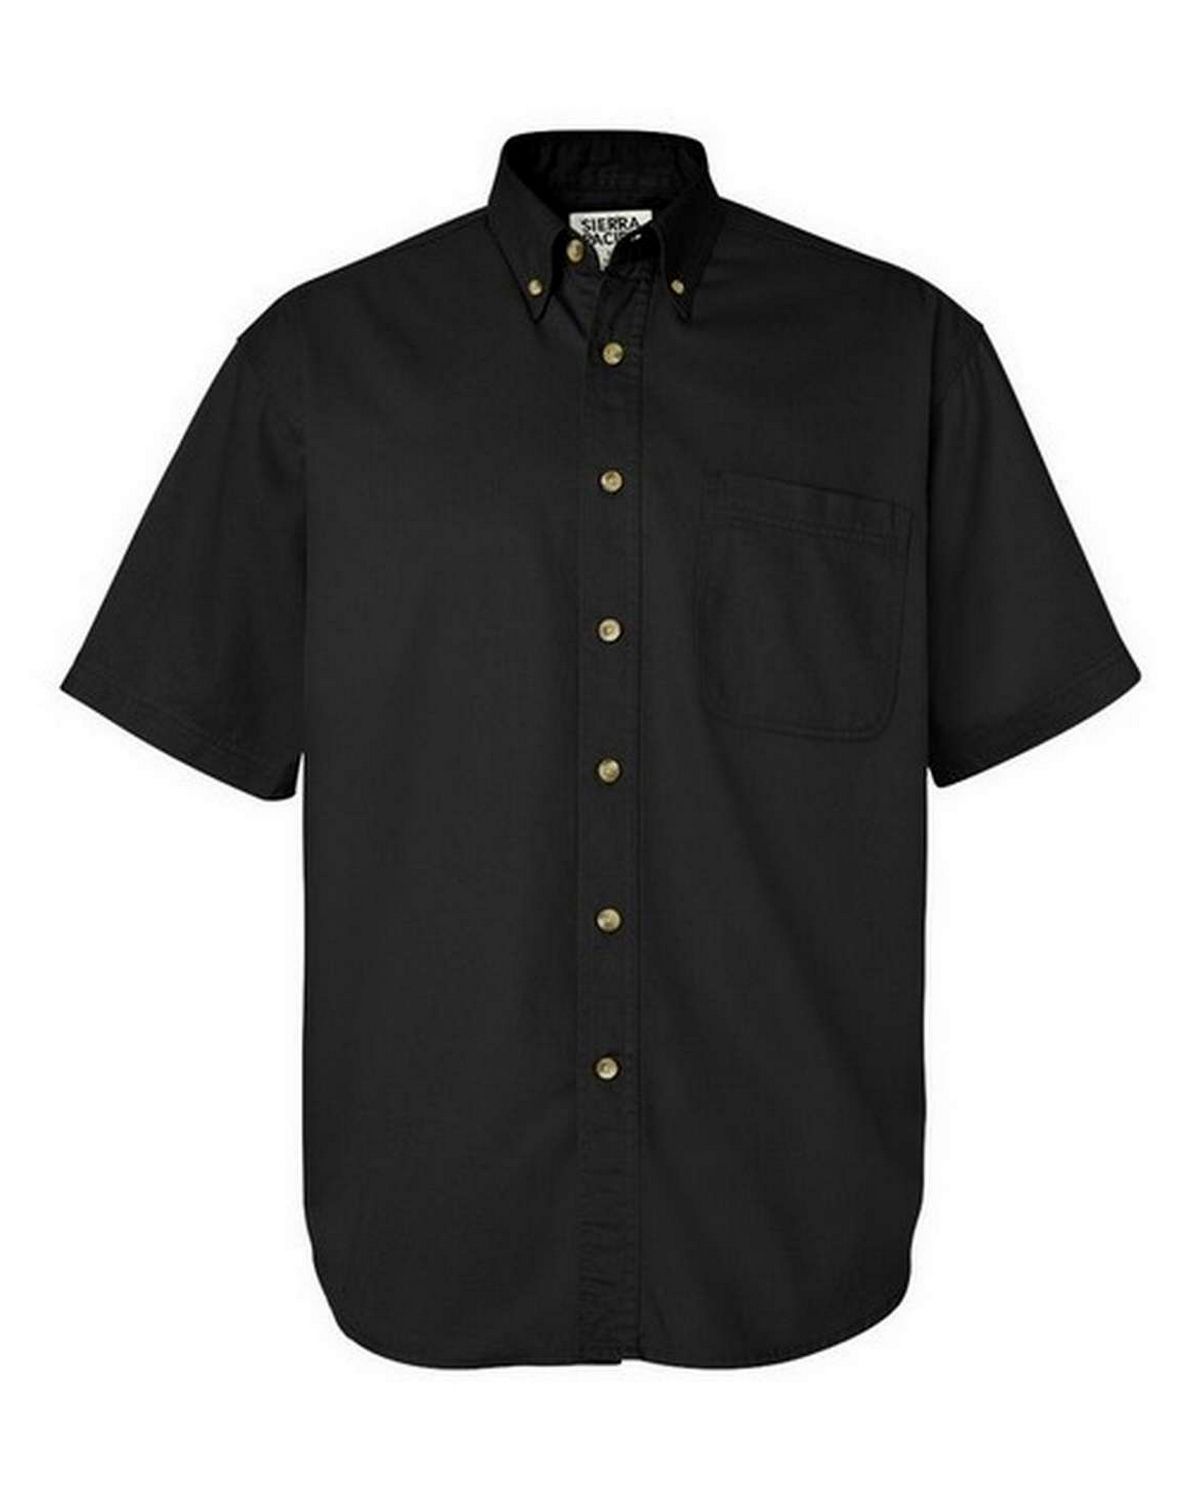 Sierra Pacific 0201 Mens Short Sleeve Washed Cotton Twill Shirt